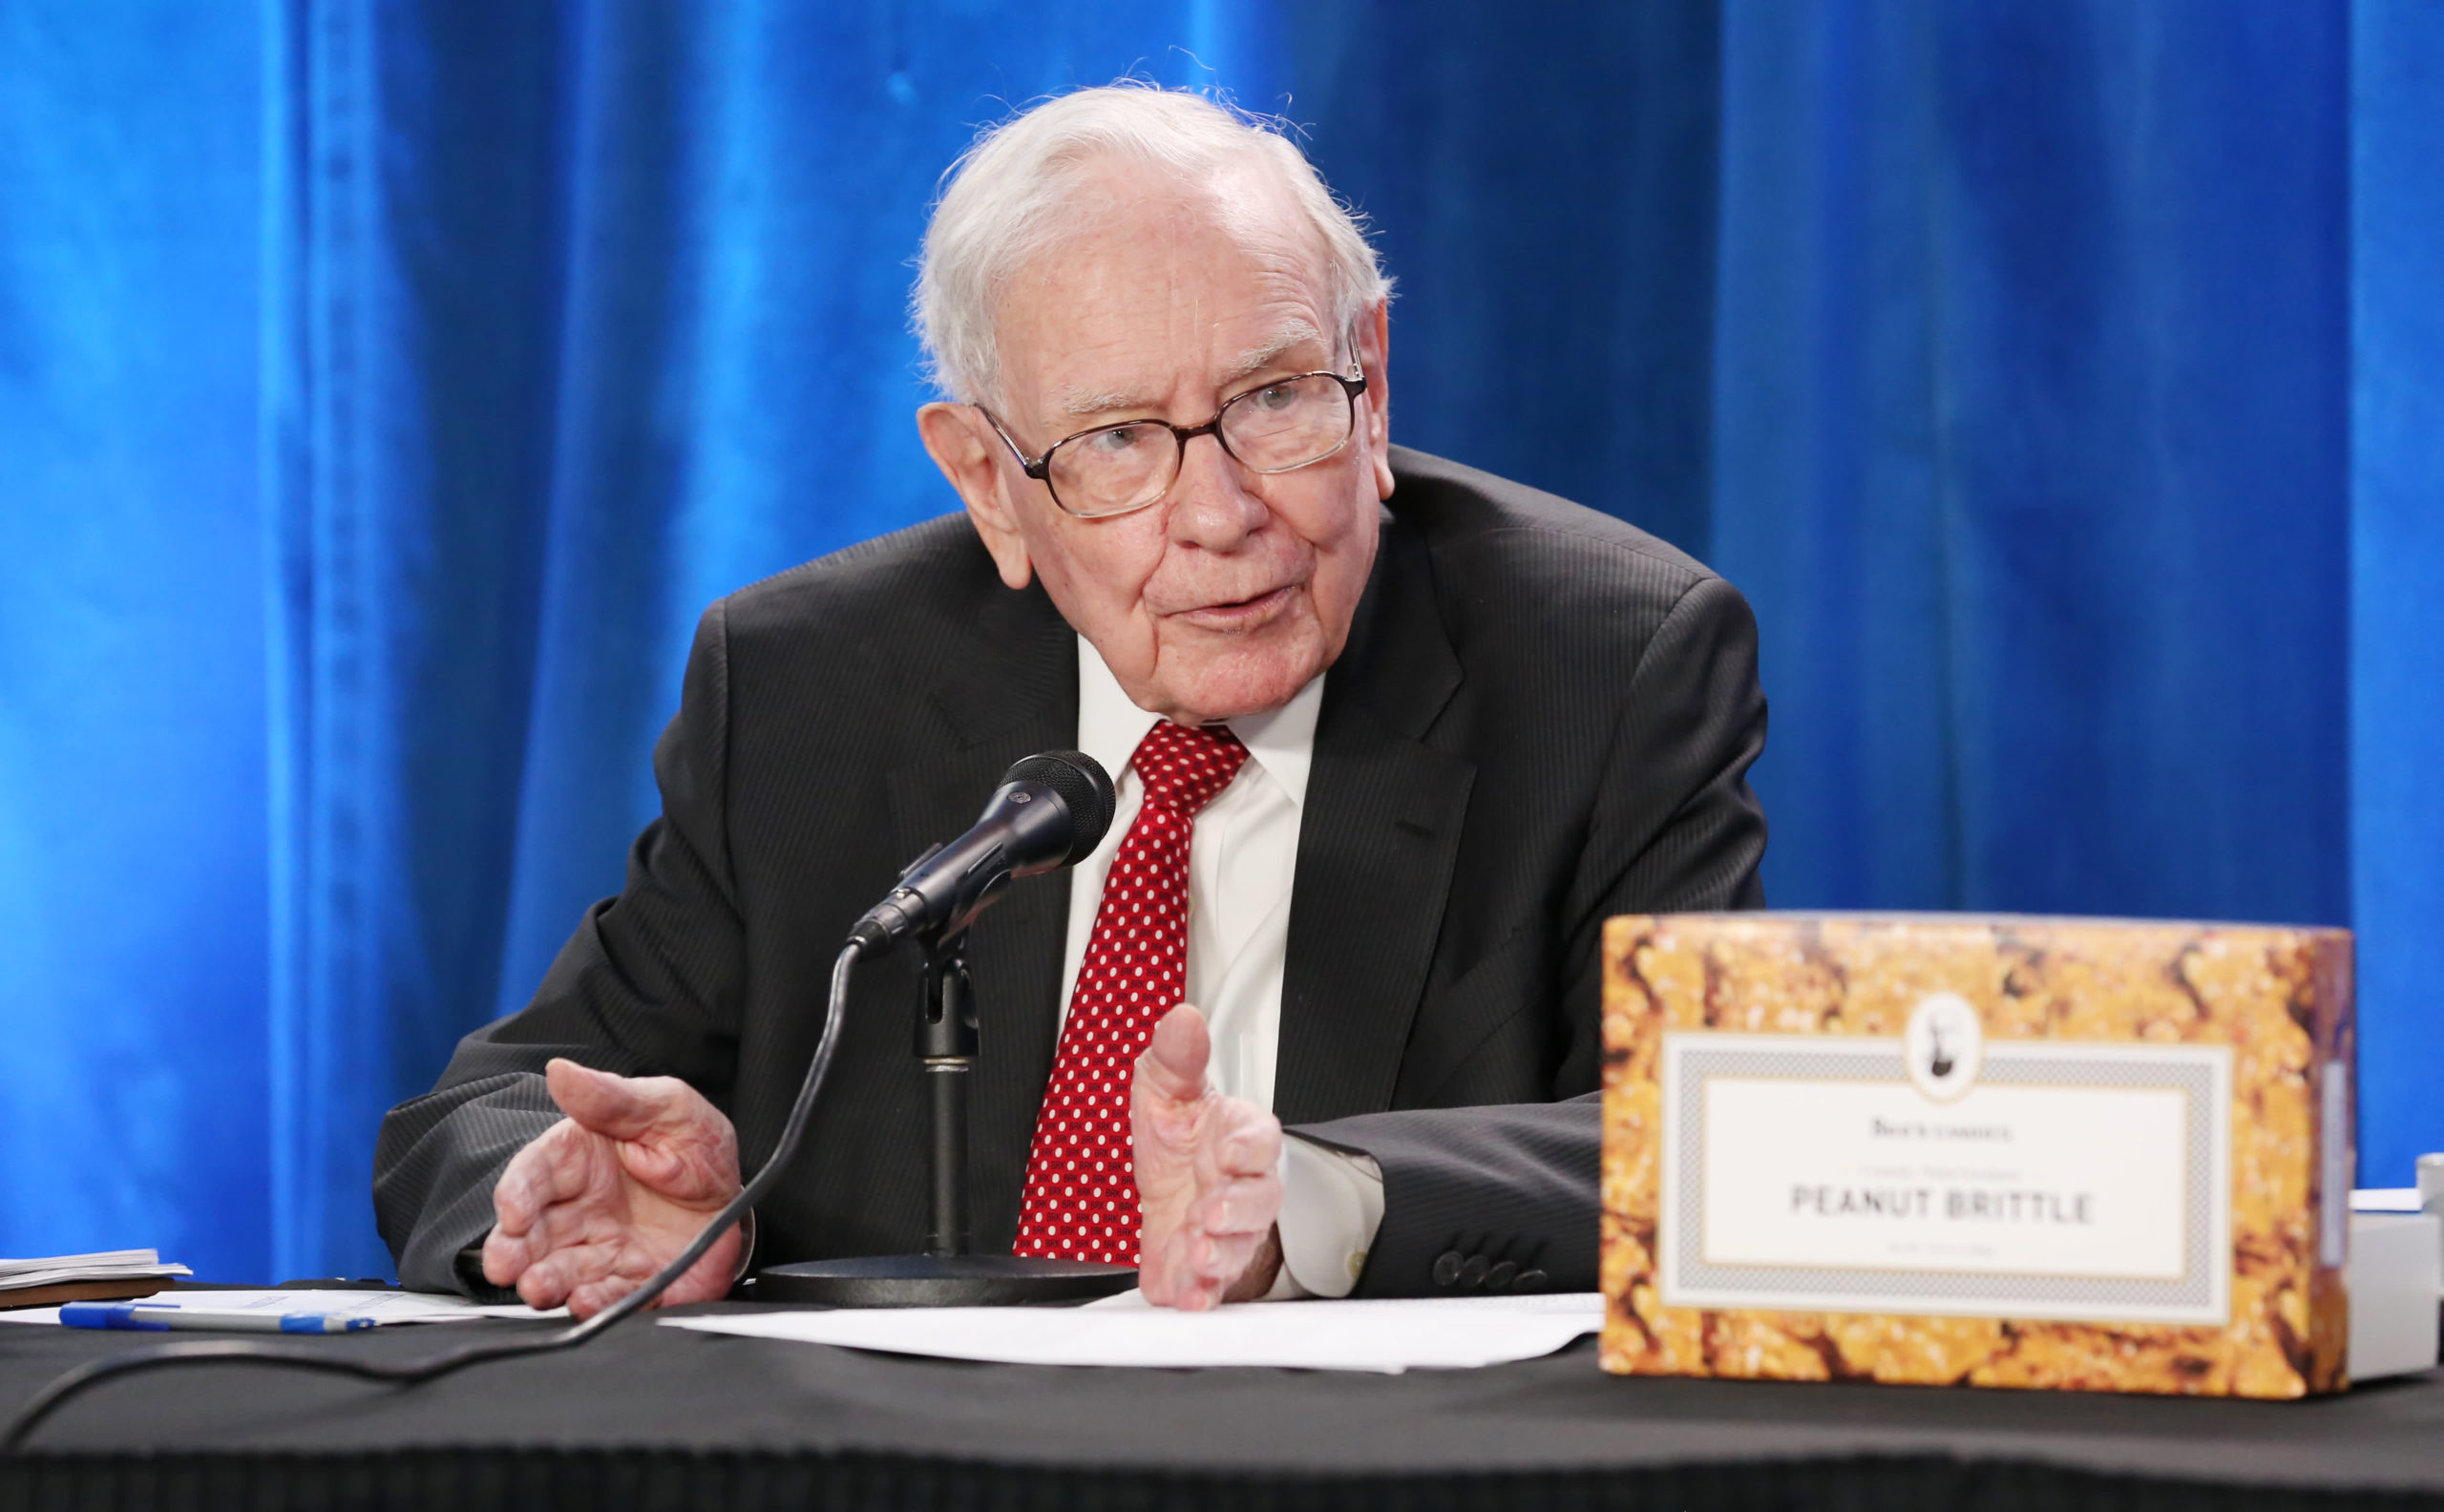 Here are Warren Buffett's latest stock bets, including a flooring stock and pharma name